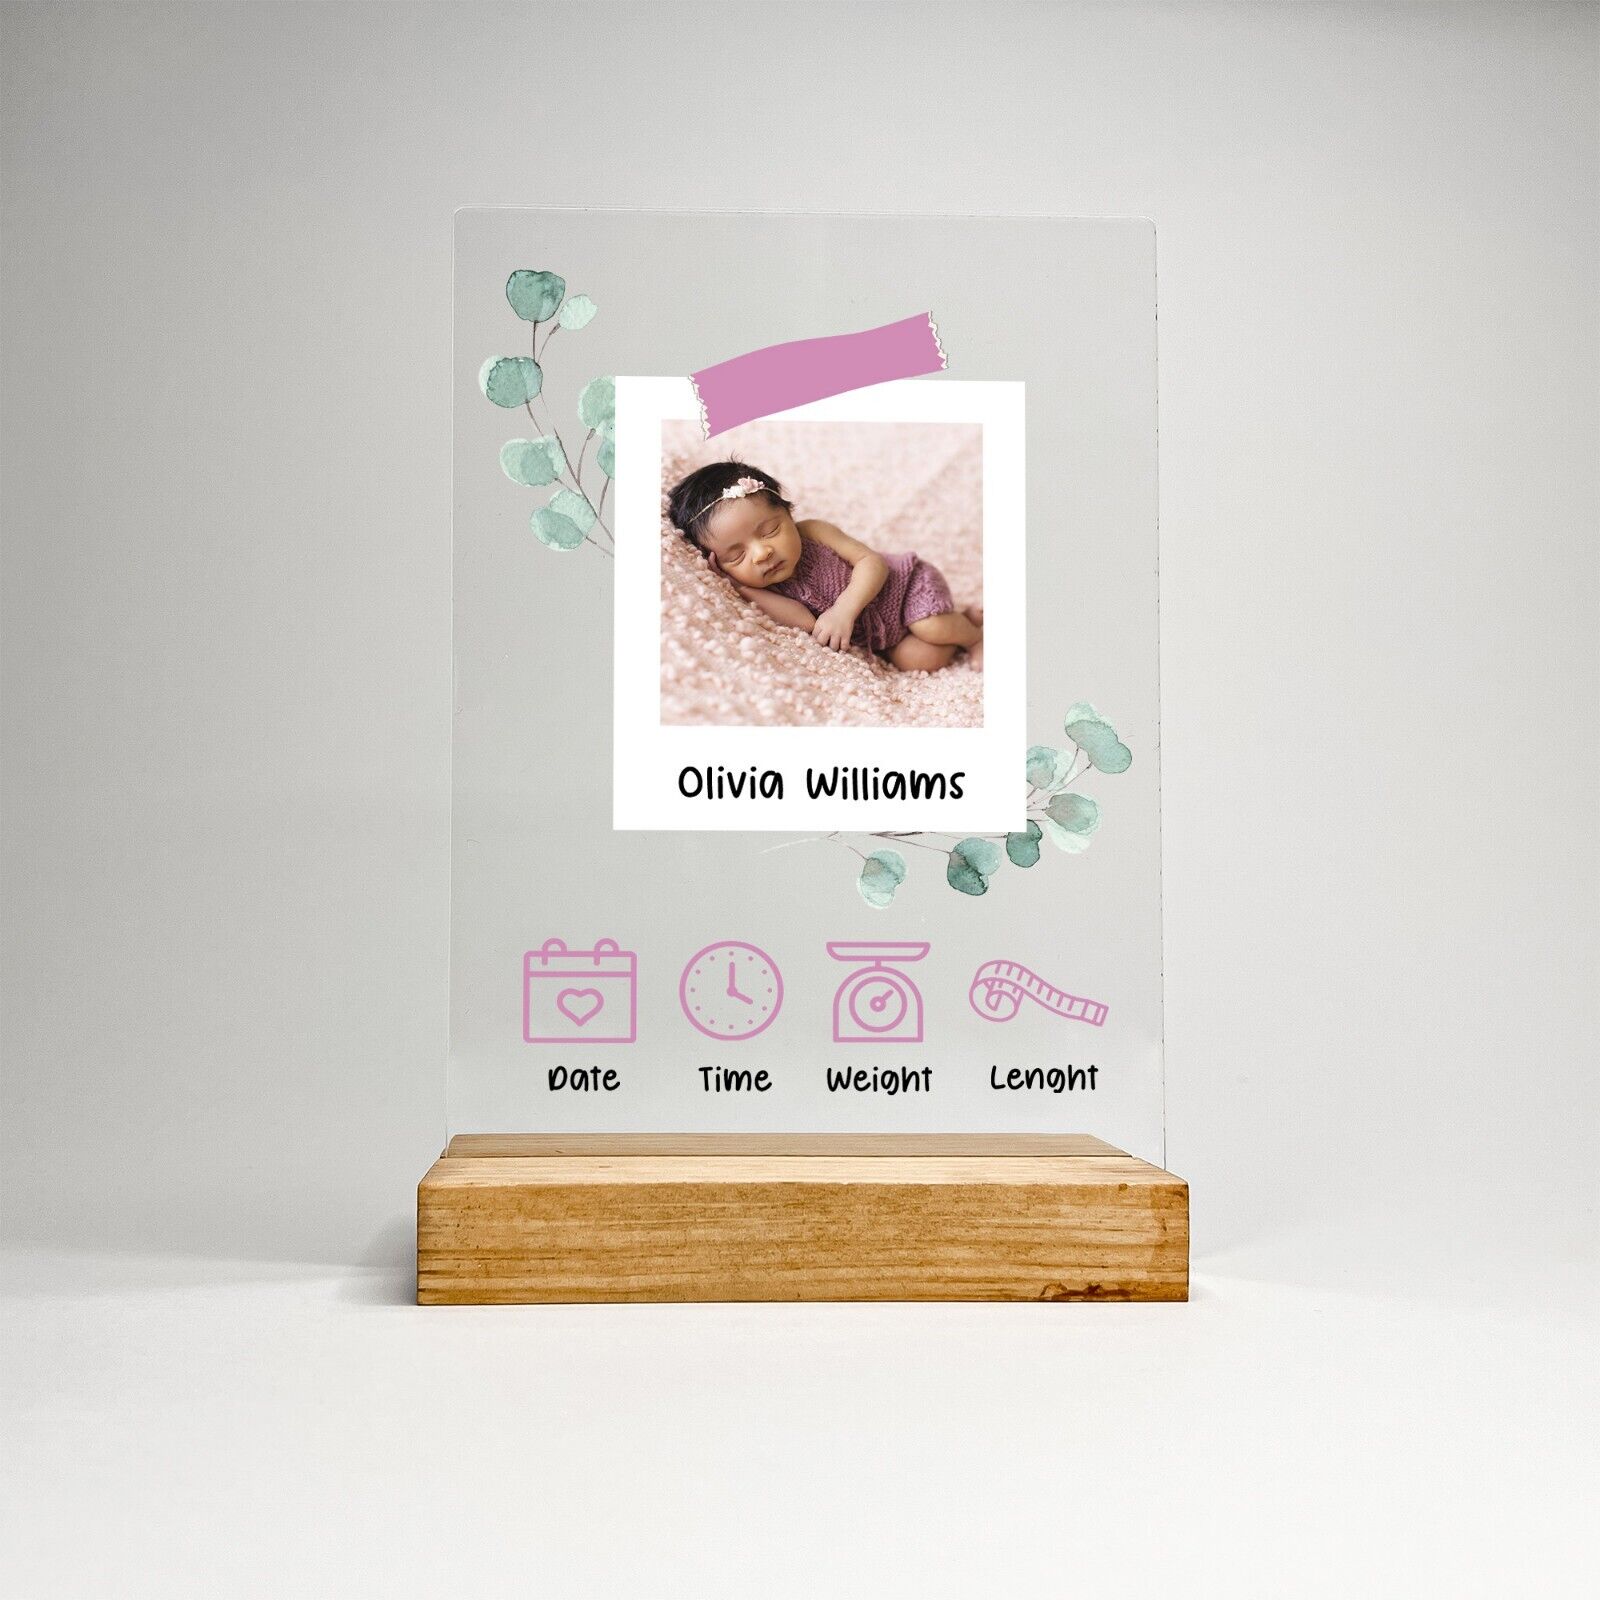 Personalized Wood Base Desk Table Stand New Born Baby Stats Nursery Decor Gift